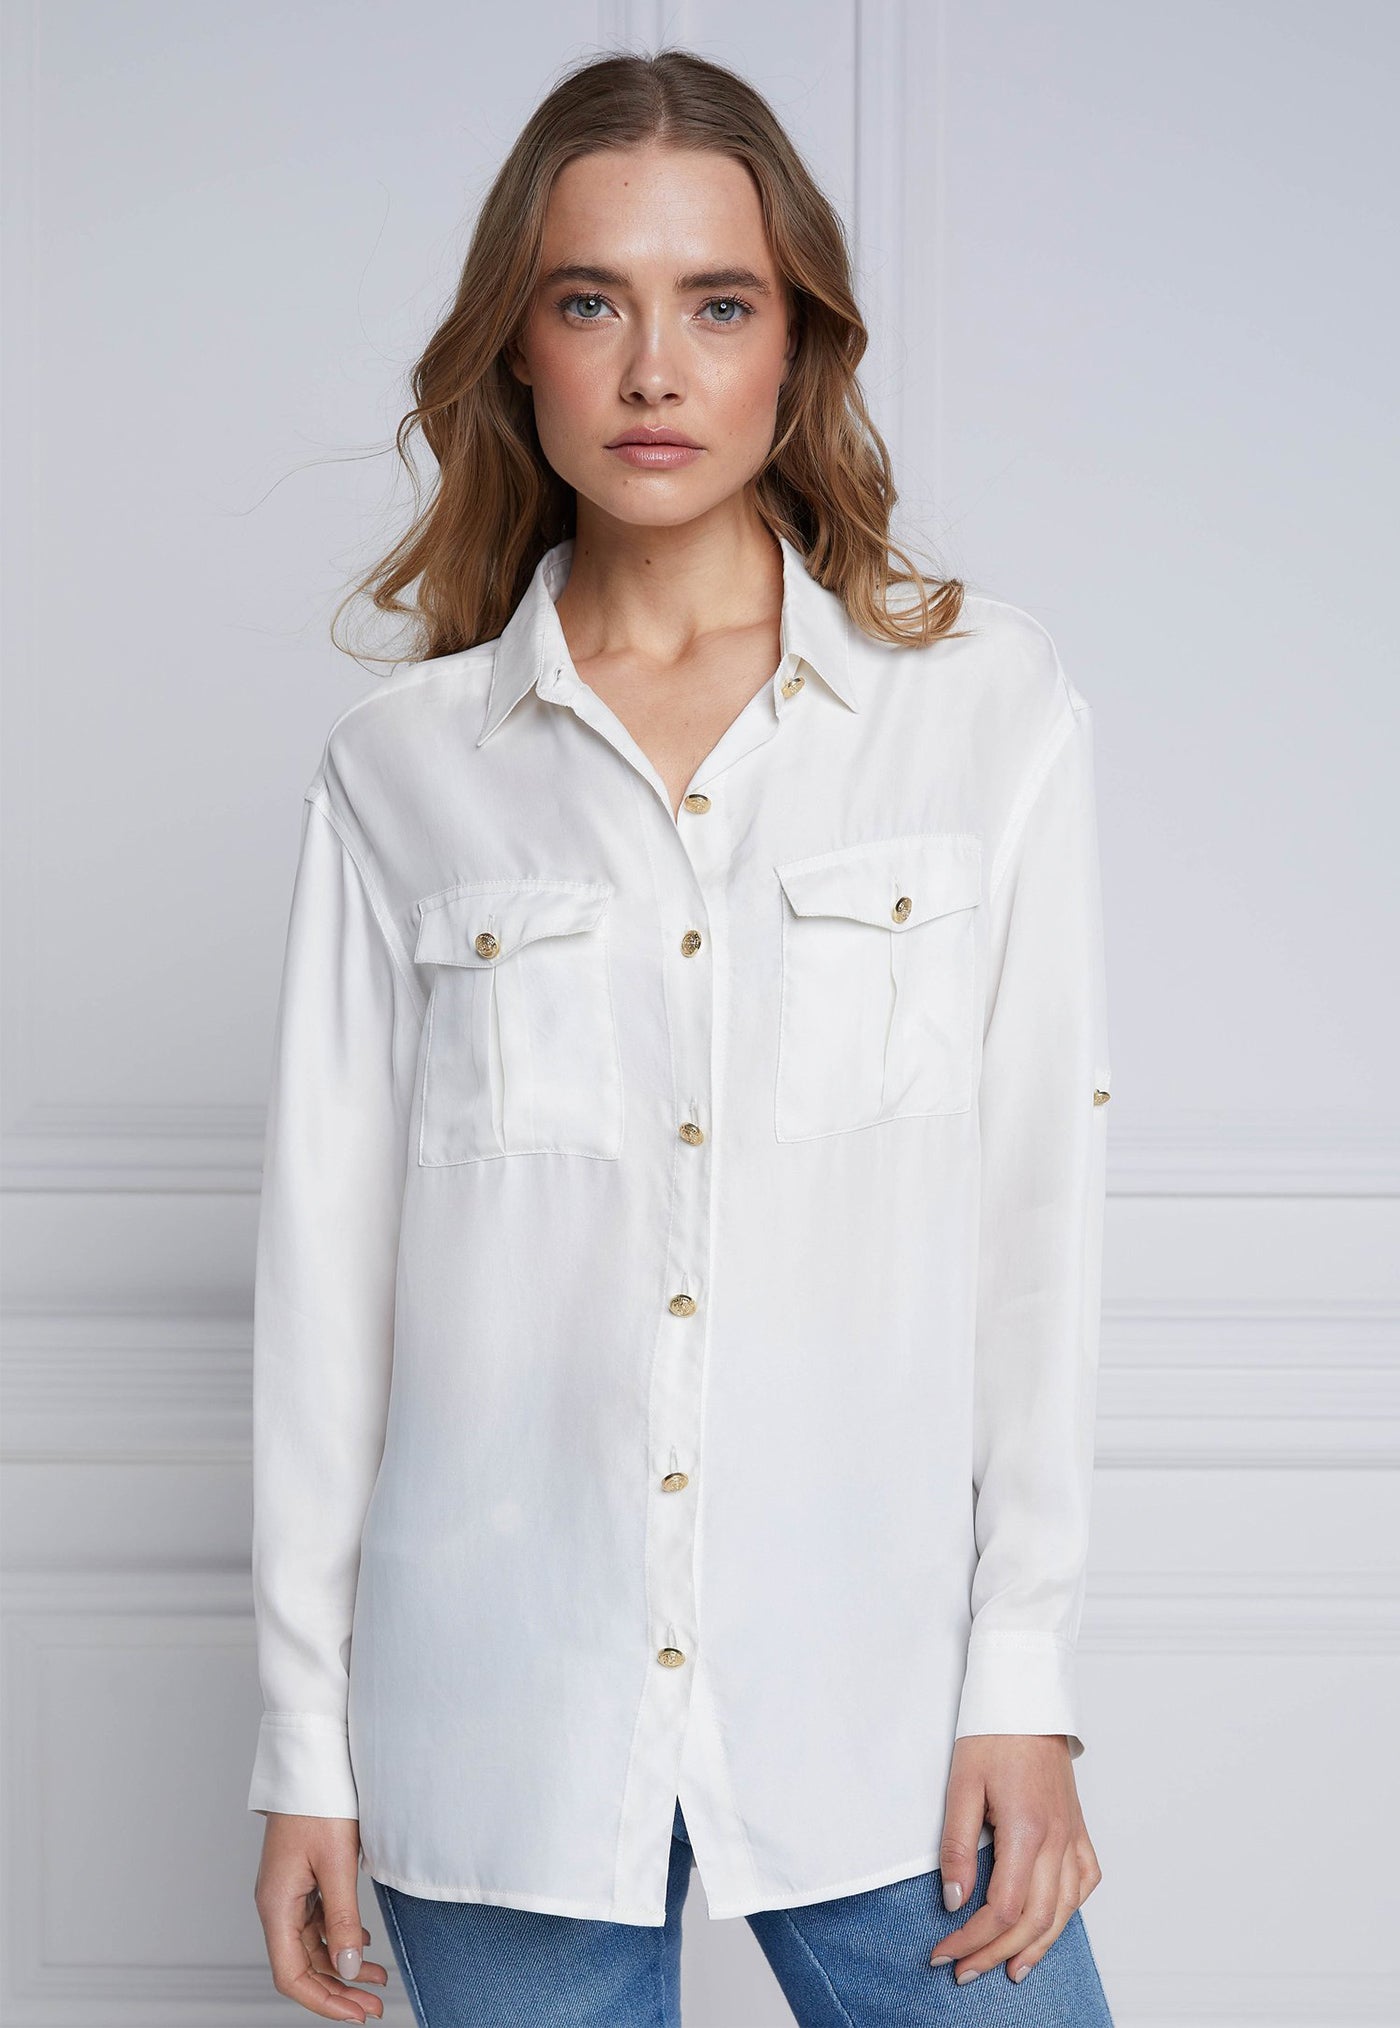 Relaxed Fit Military Shirt - Cream sold by Angel Divine